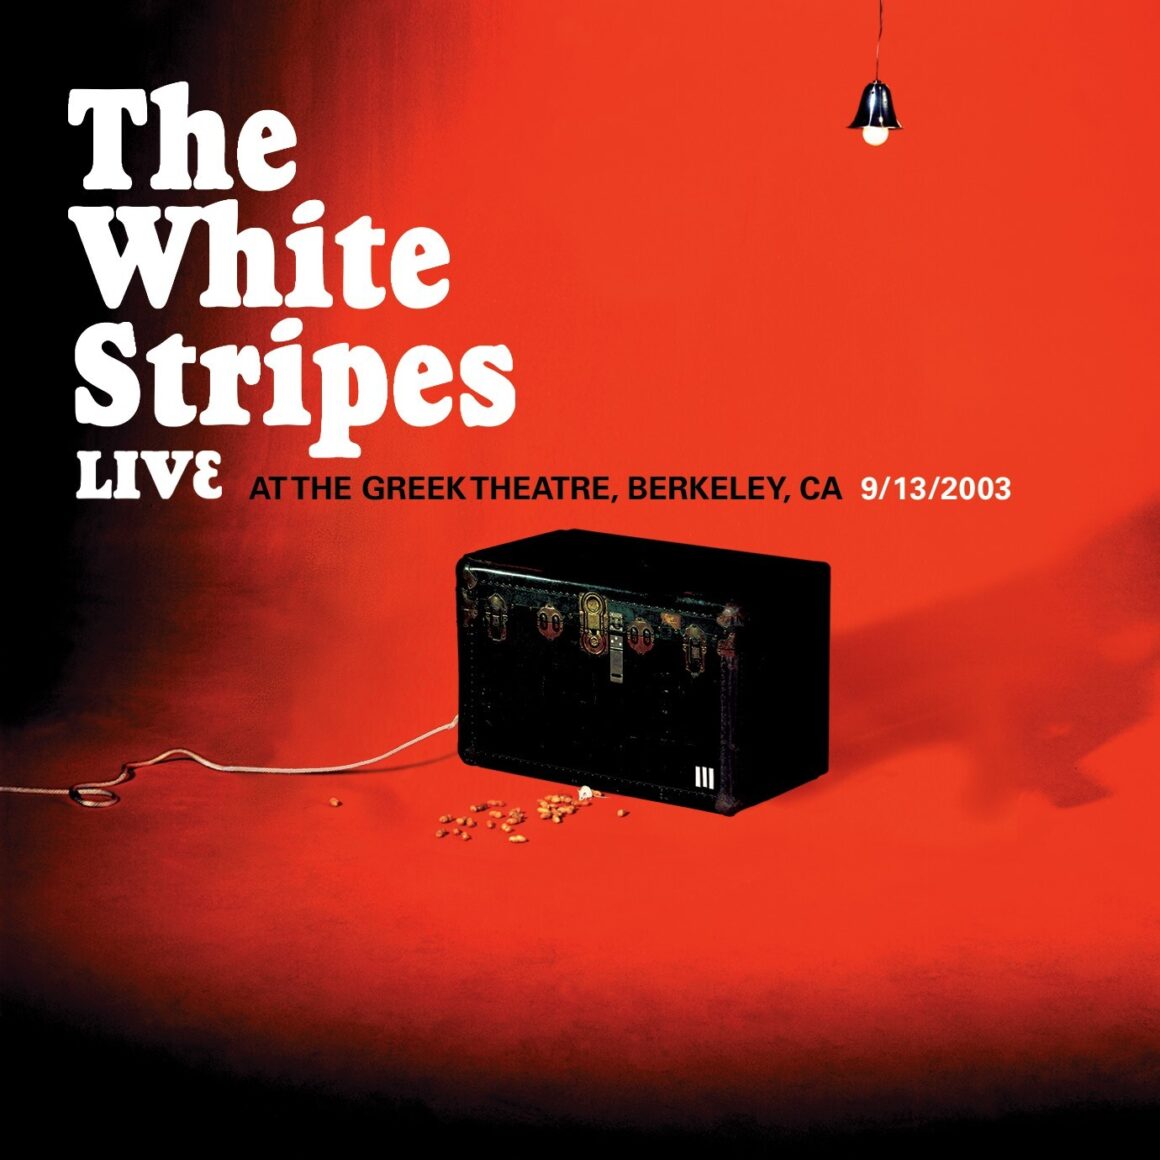 The White Stripes Live at The Greek Theatre, September 13, 2003